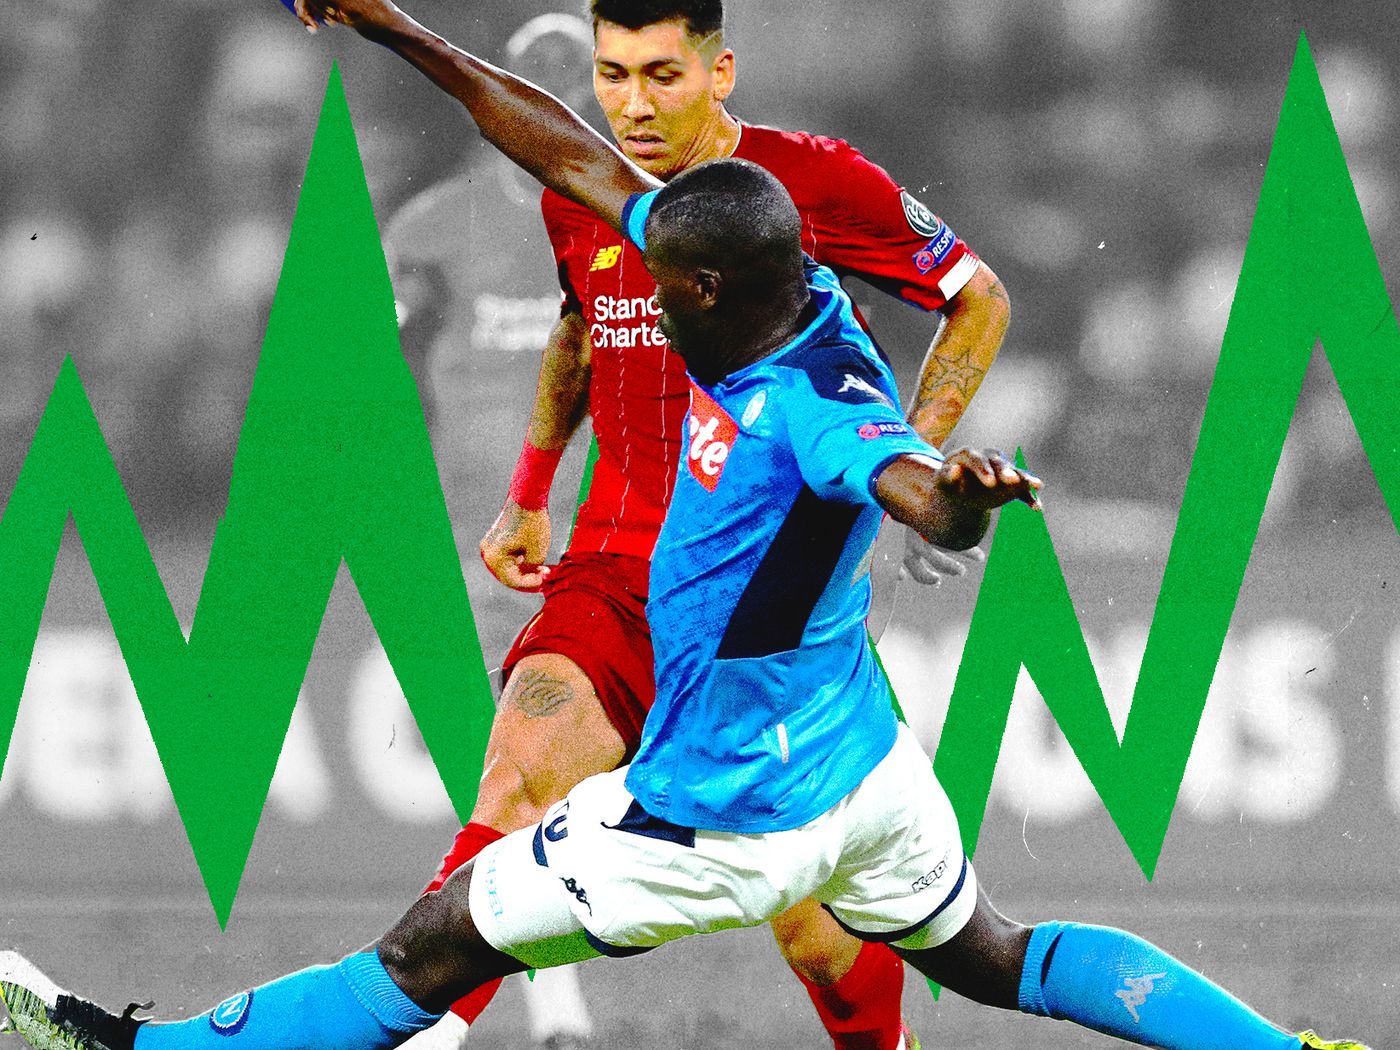 Kalidou Koulibaly's game against Liverpool was high art